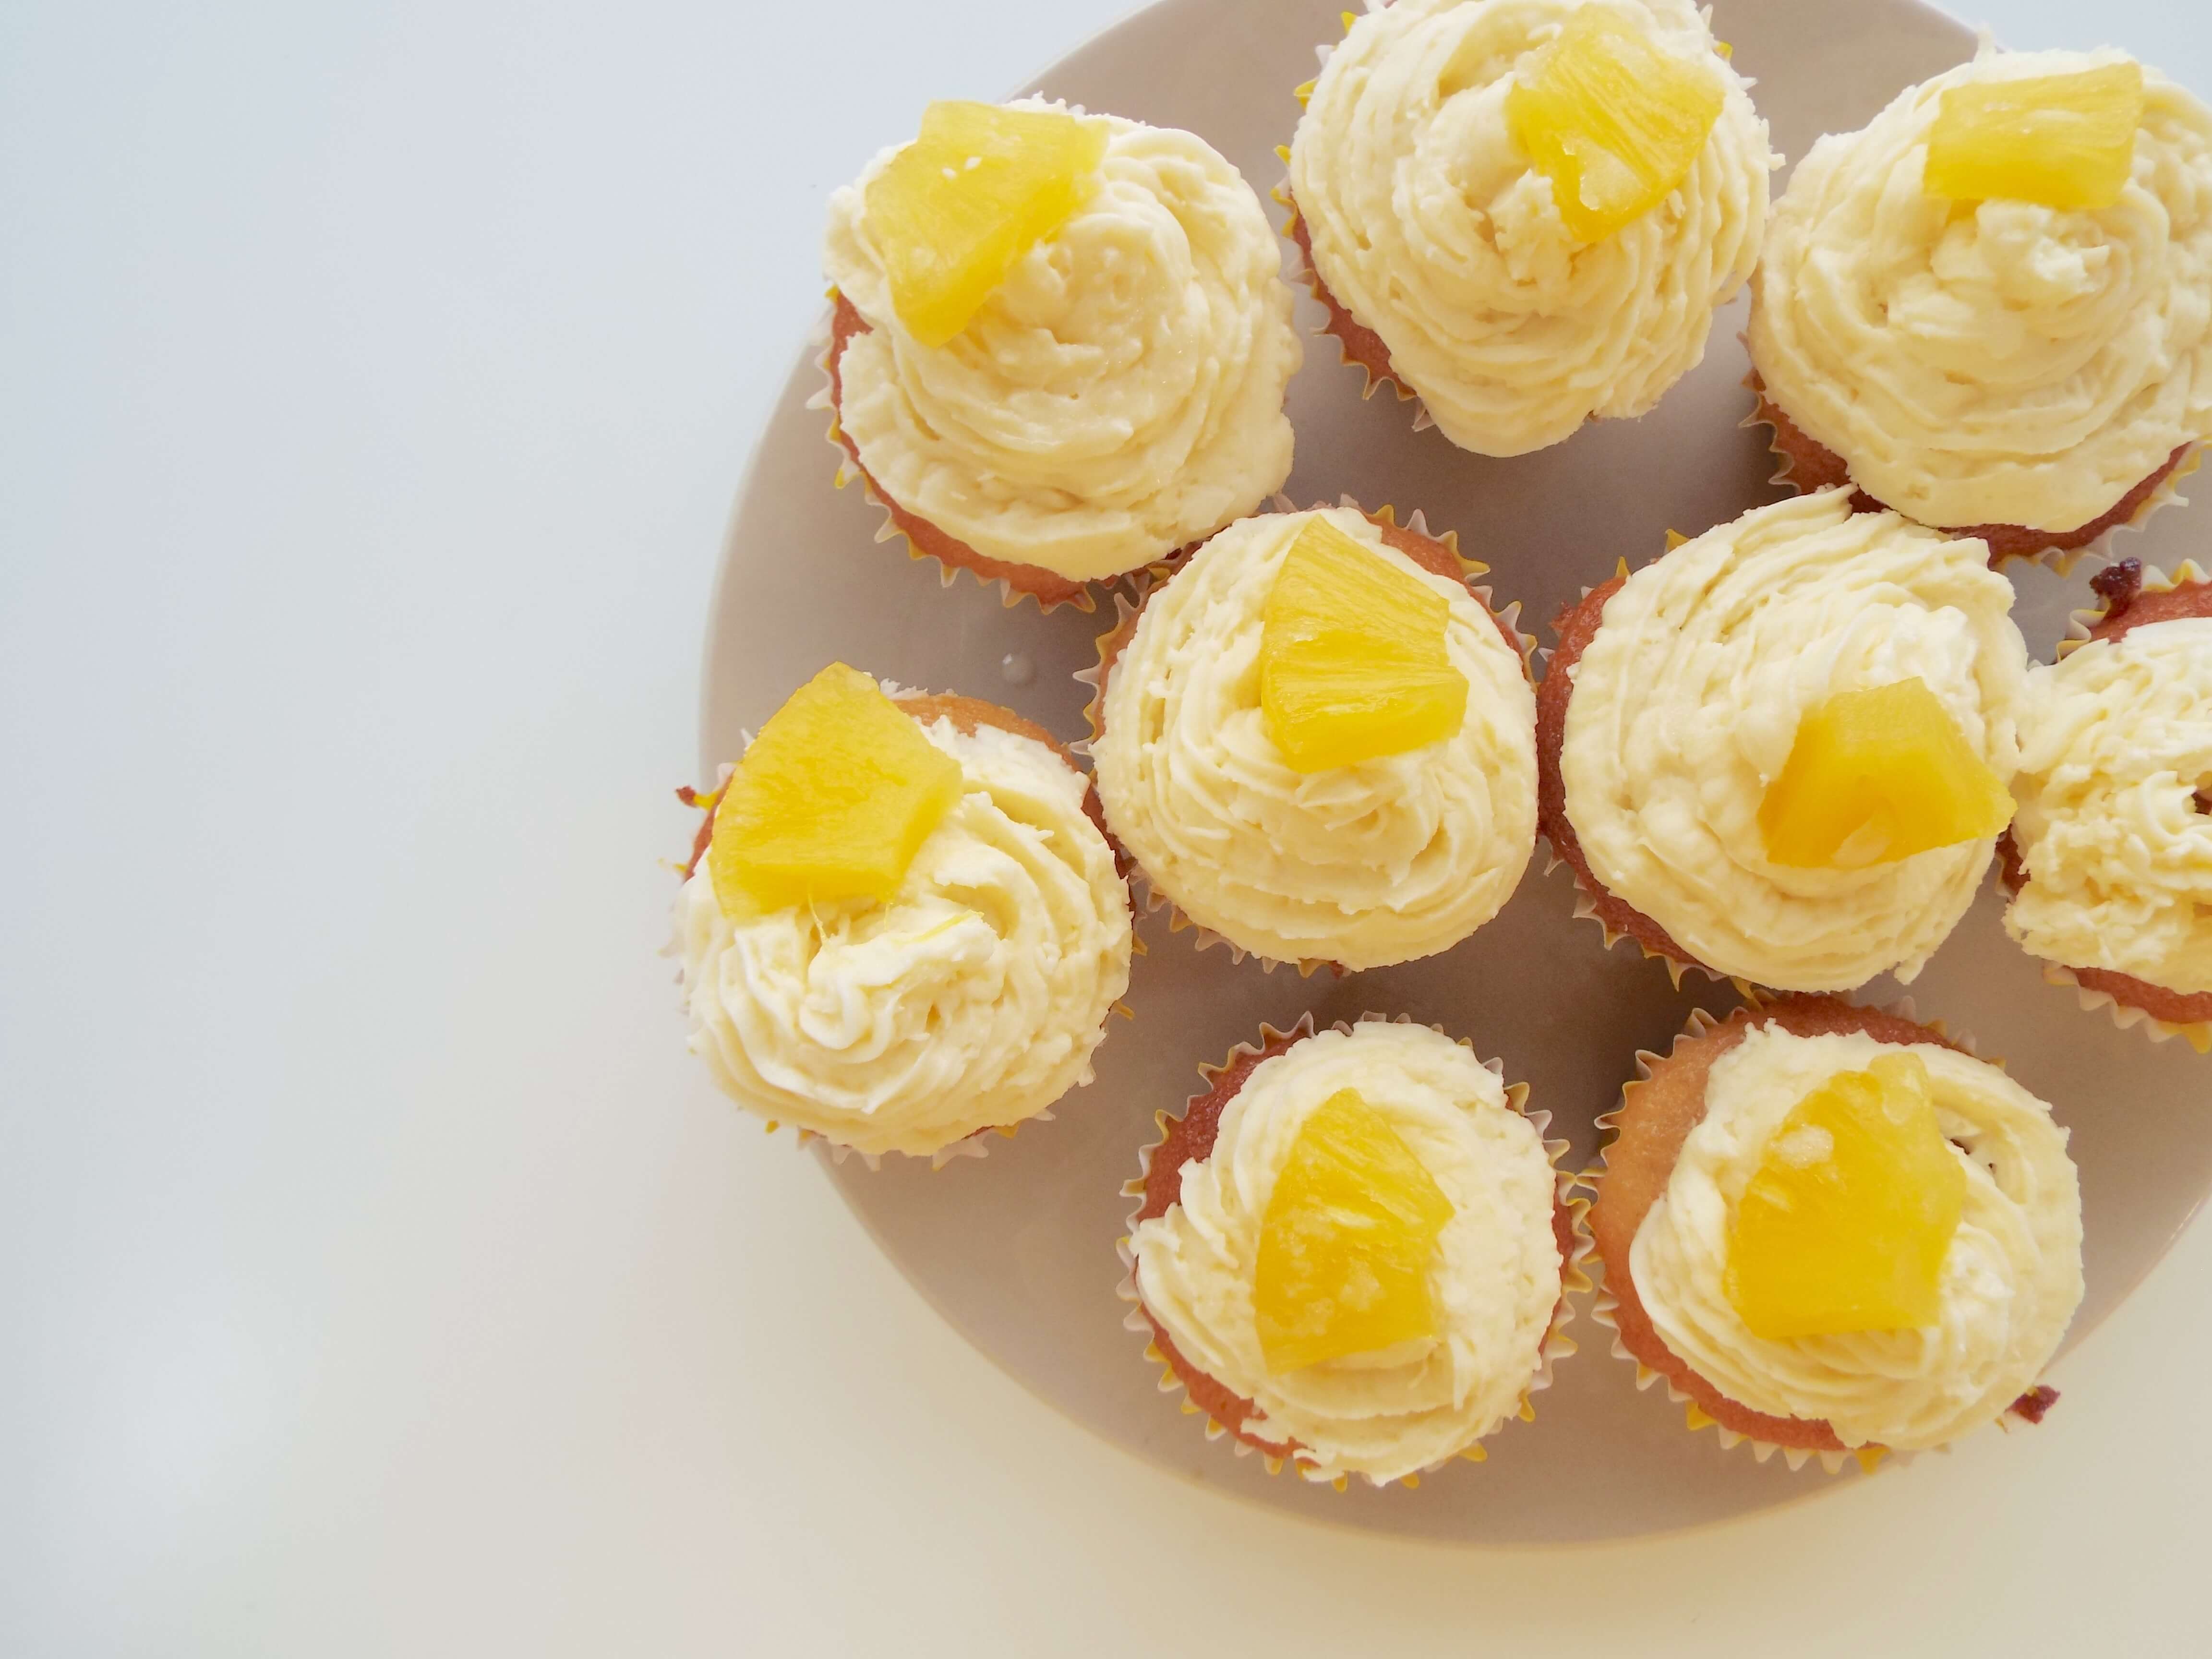 Plate of nine, coconut cream buttercream iced cupcakes, with a pineapple slice on top of each.